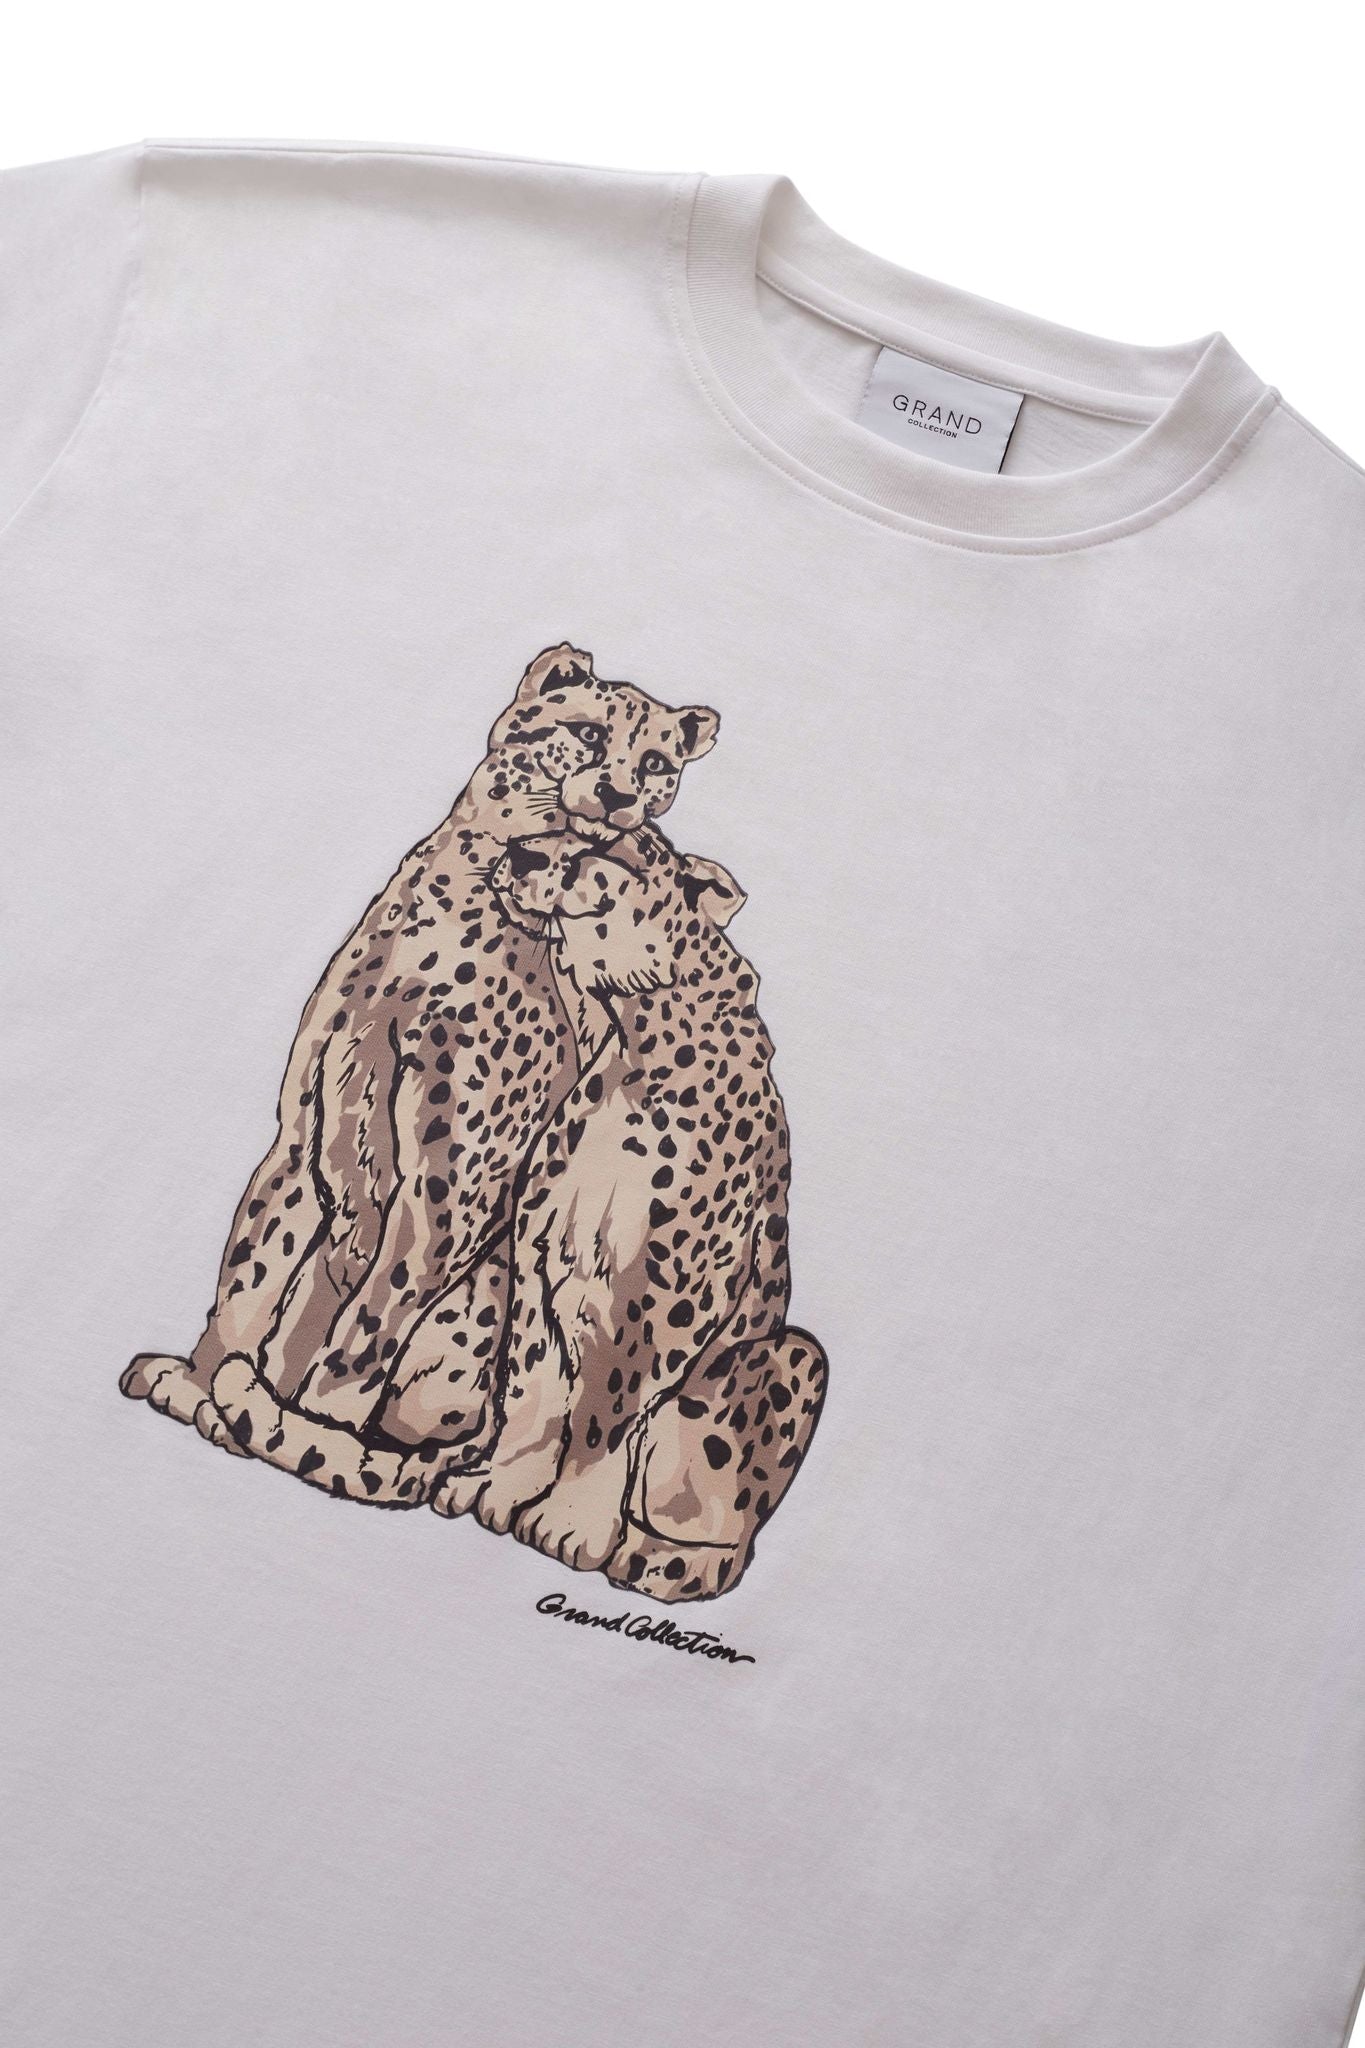 Grand Collection - Snow Leopard Tee White